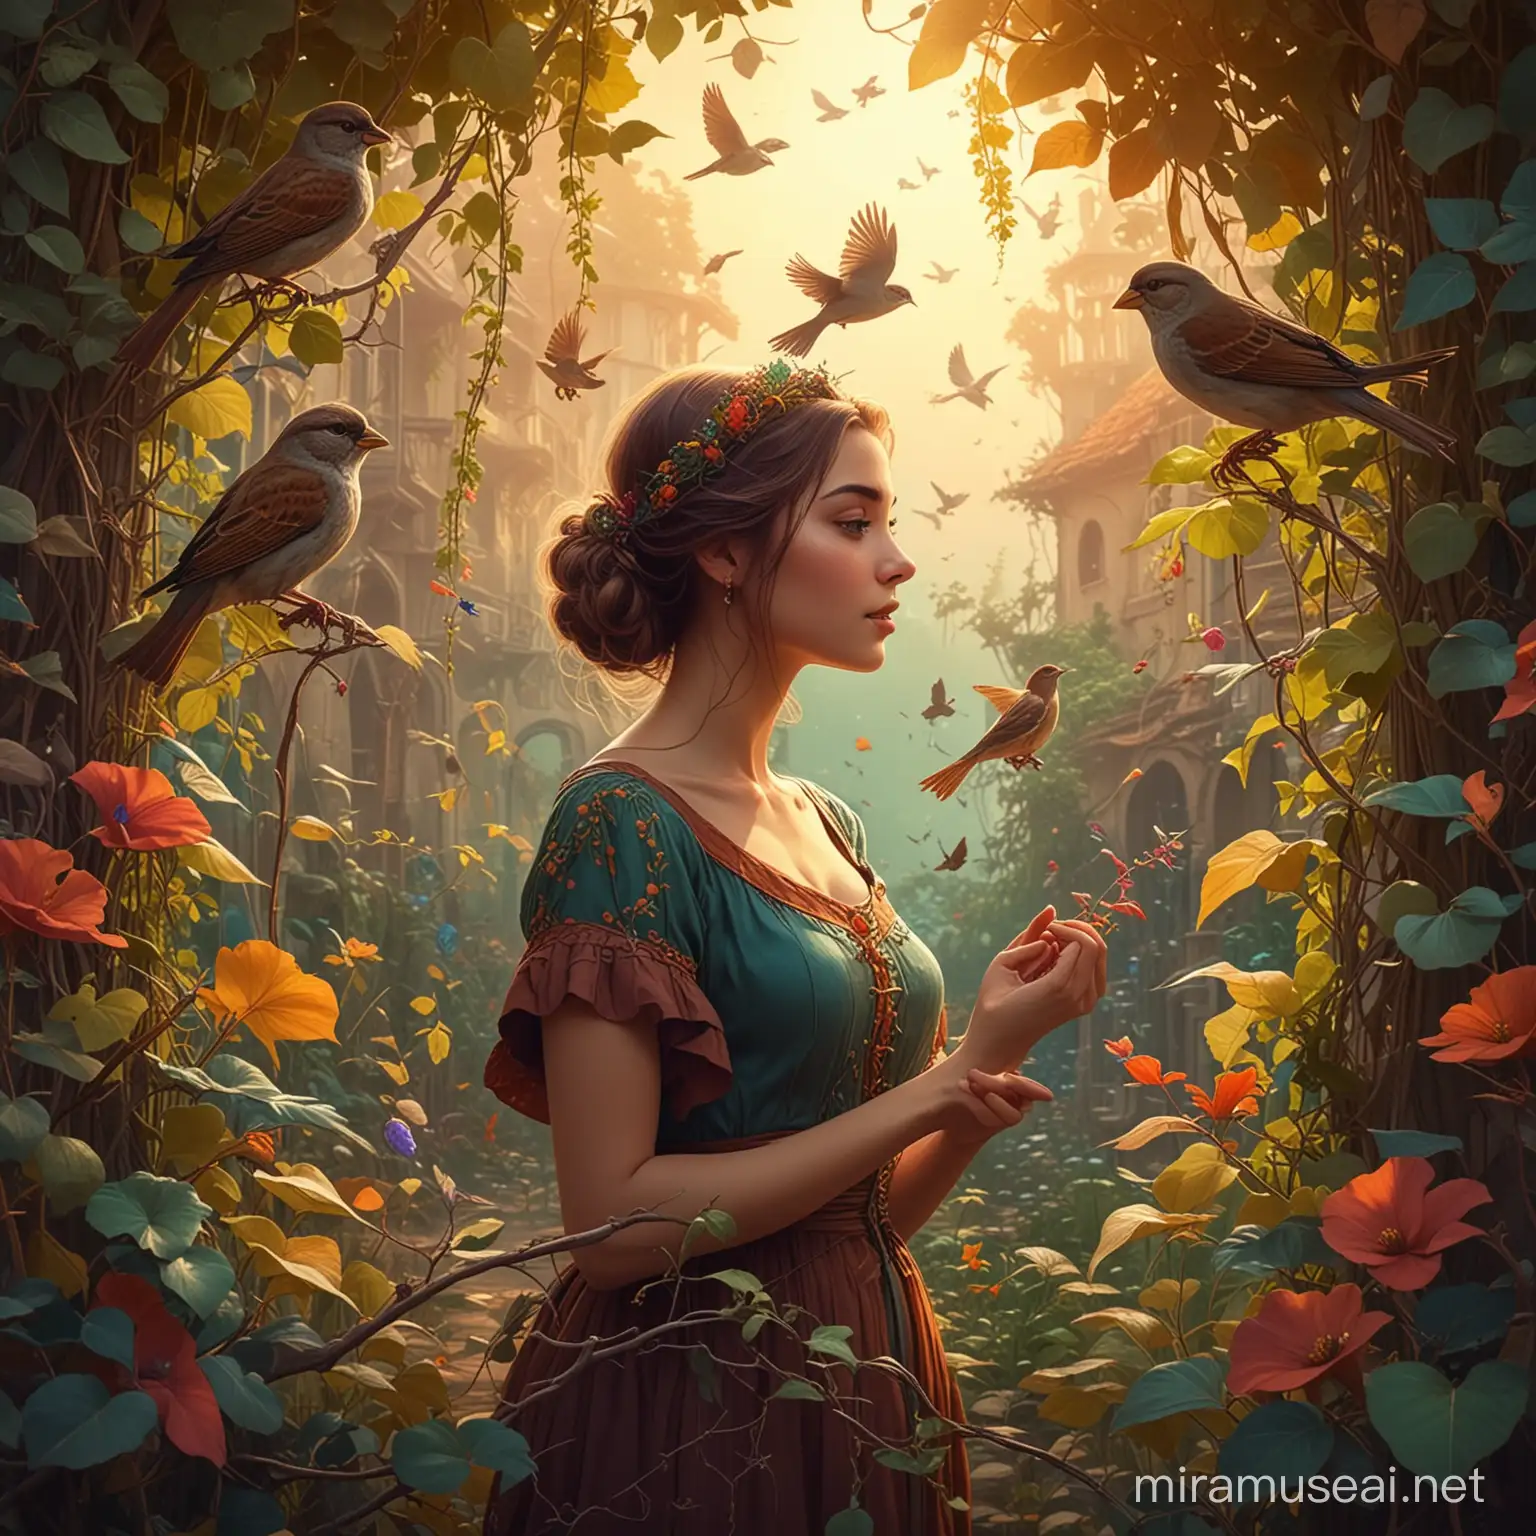 vintage animation style, young woman and sparrow, surrounded by vines, colorful, mystical world